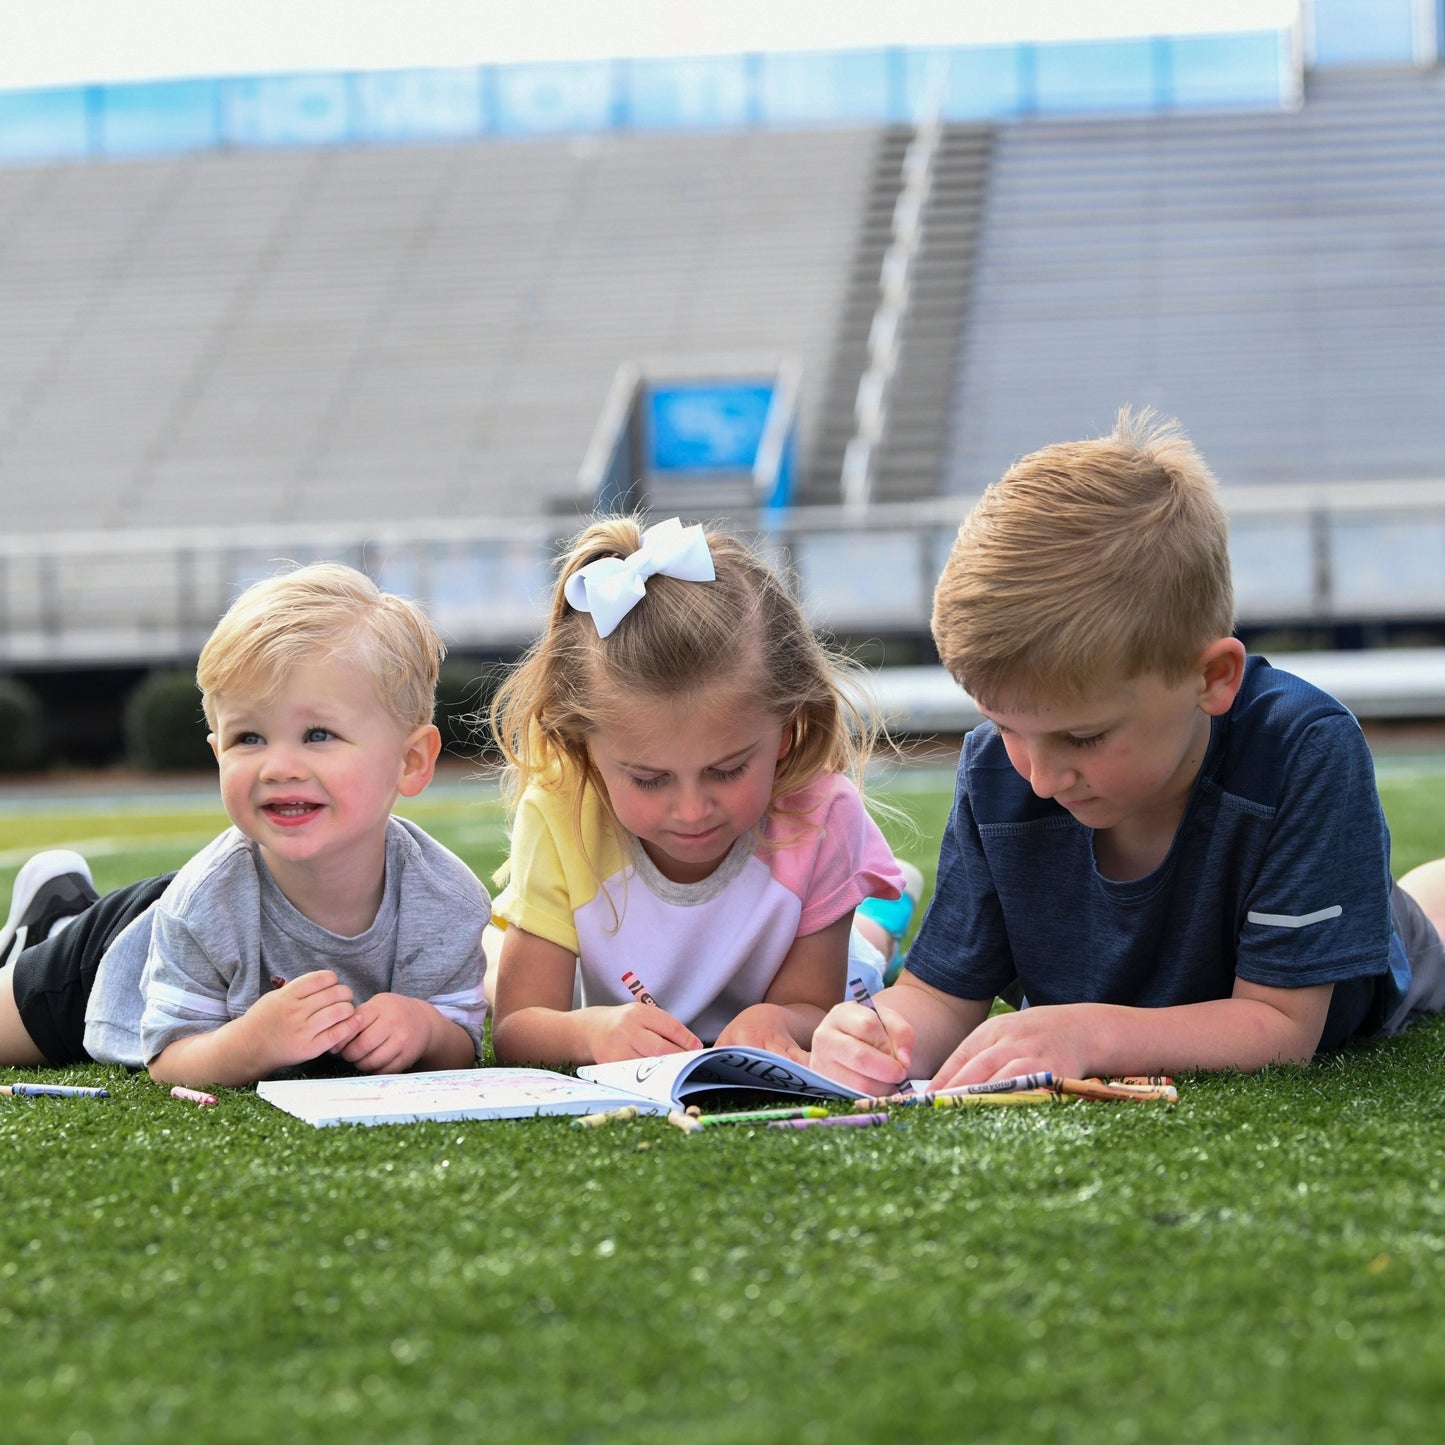 So Your Dad Is A Soccer Coach: A Coloring and Activity Book for the Coach's Kid